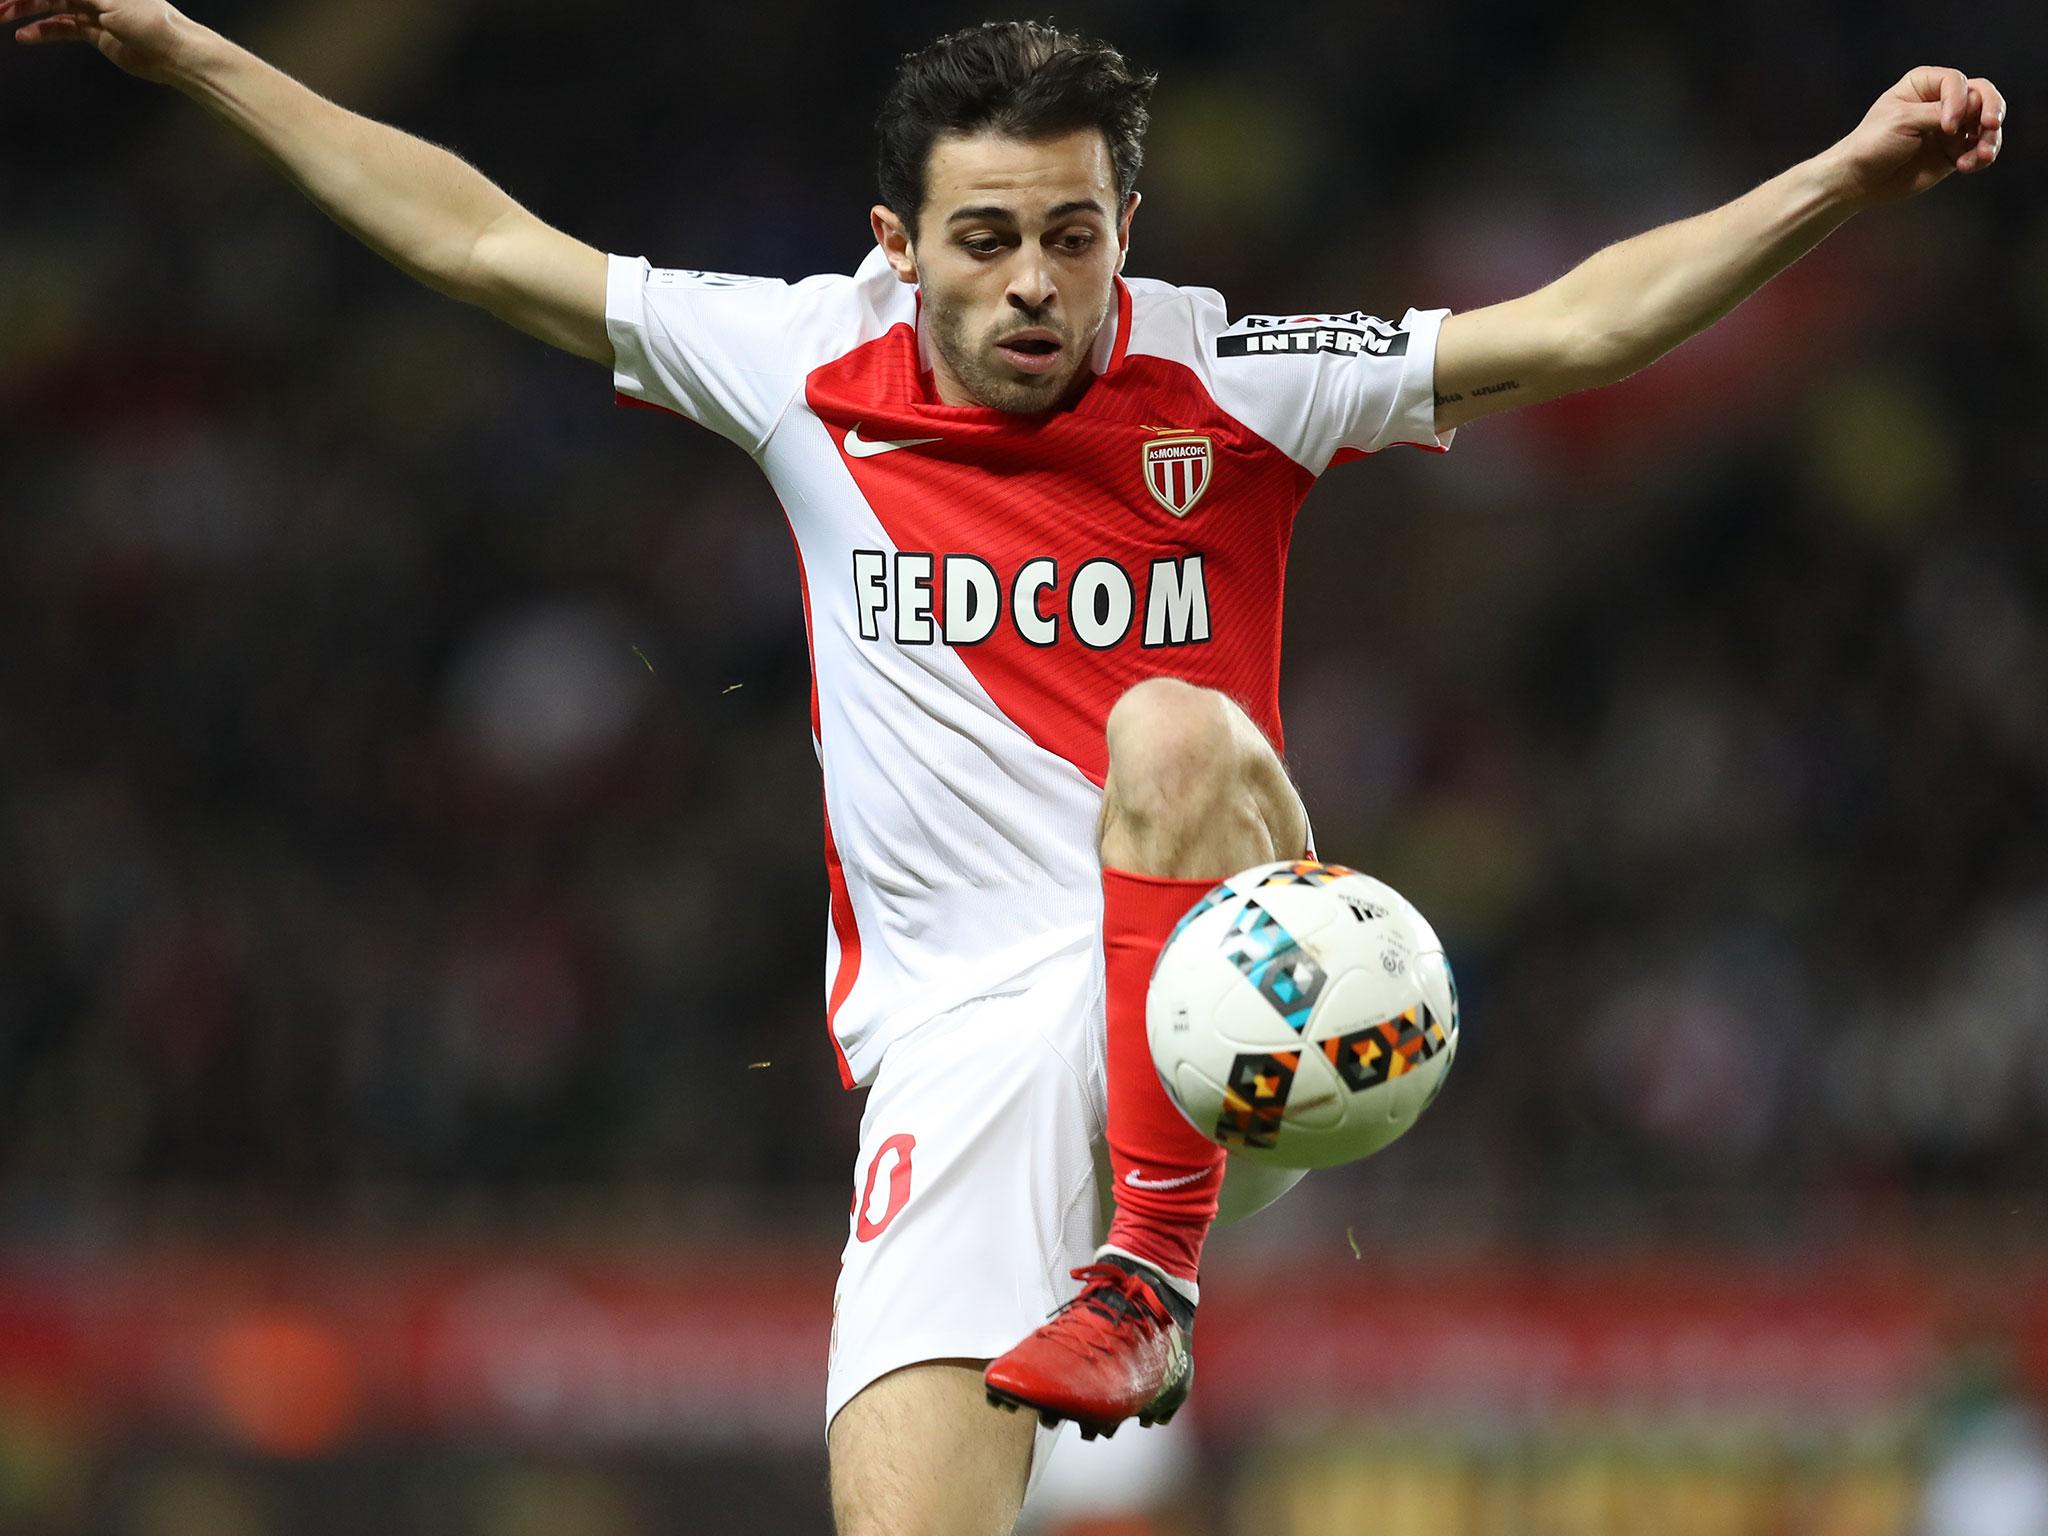 Bernardo Silva is a reported £70m target for Manchester United